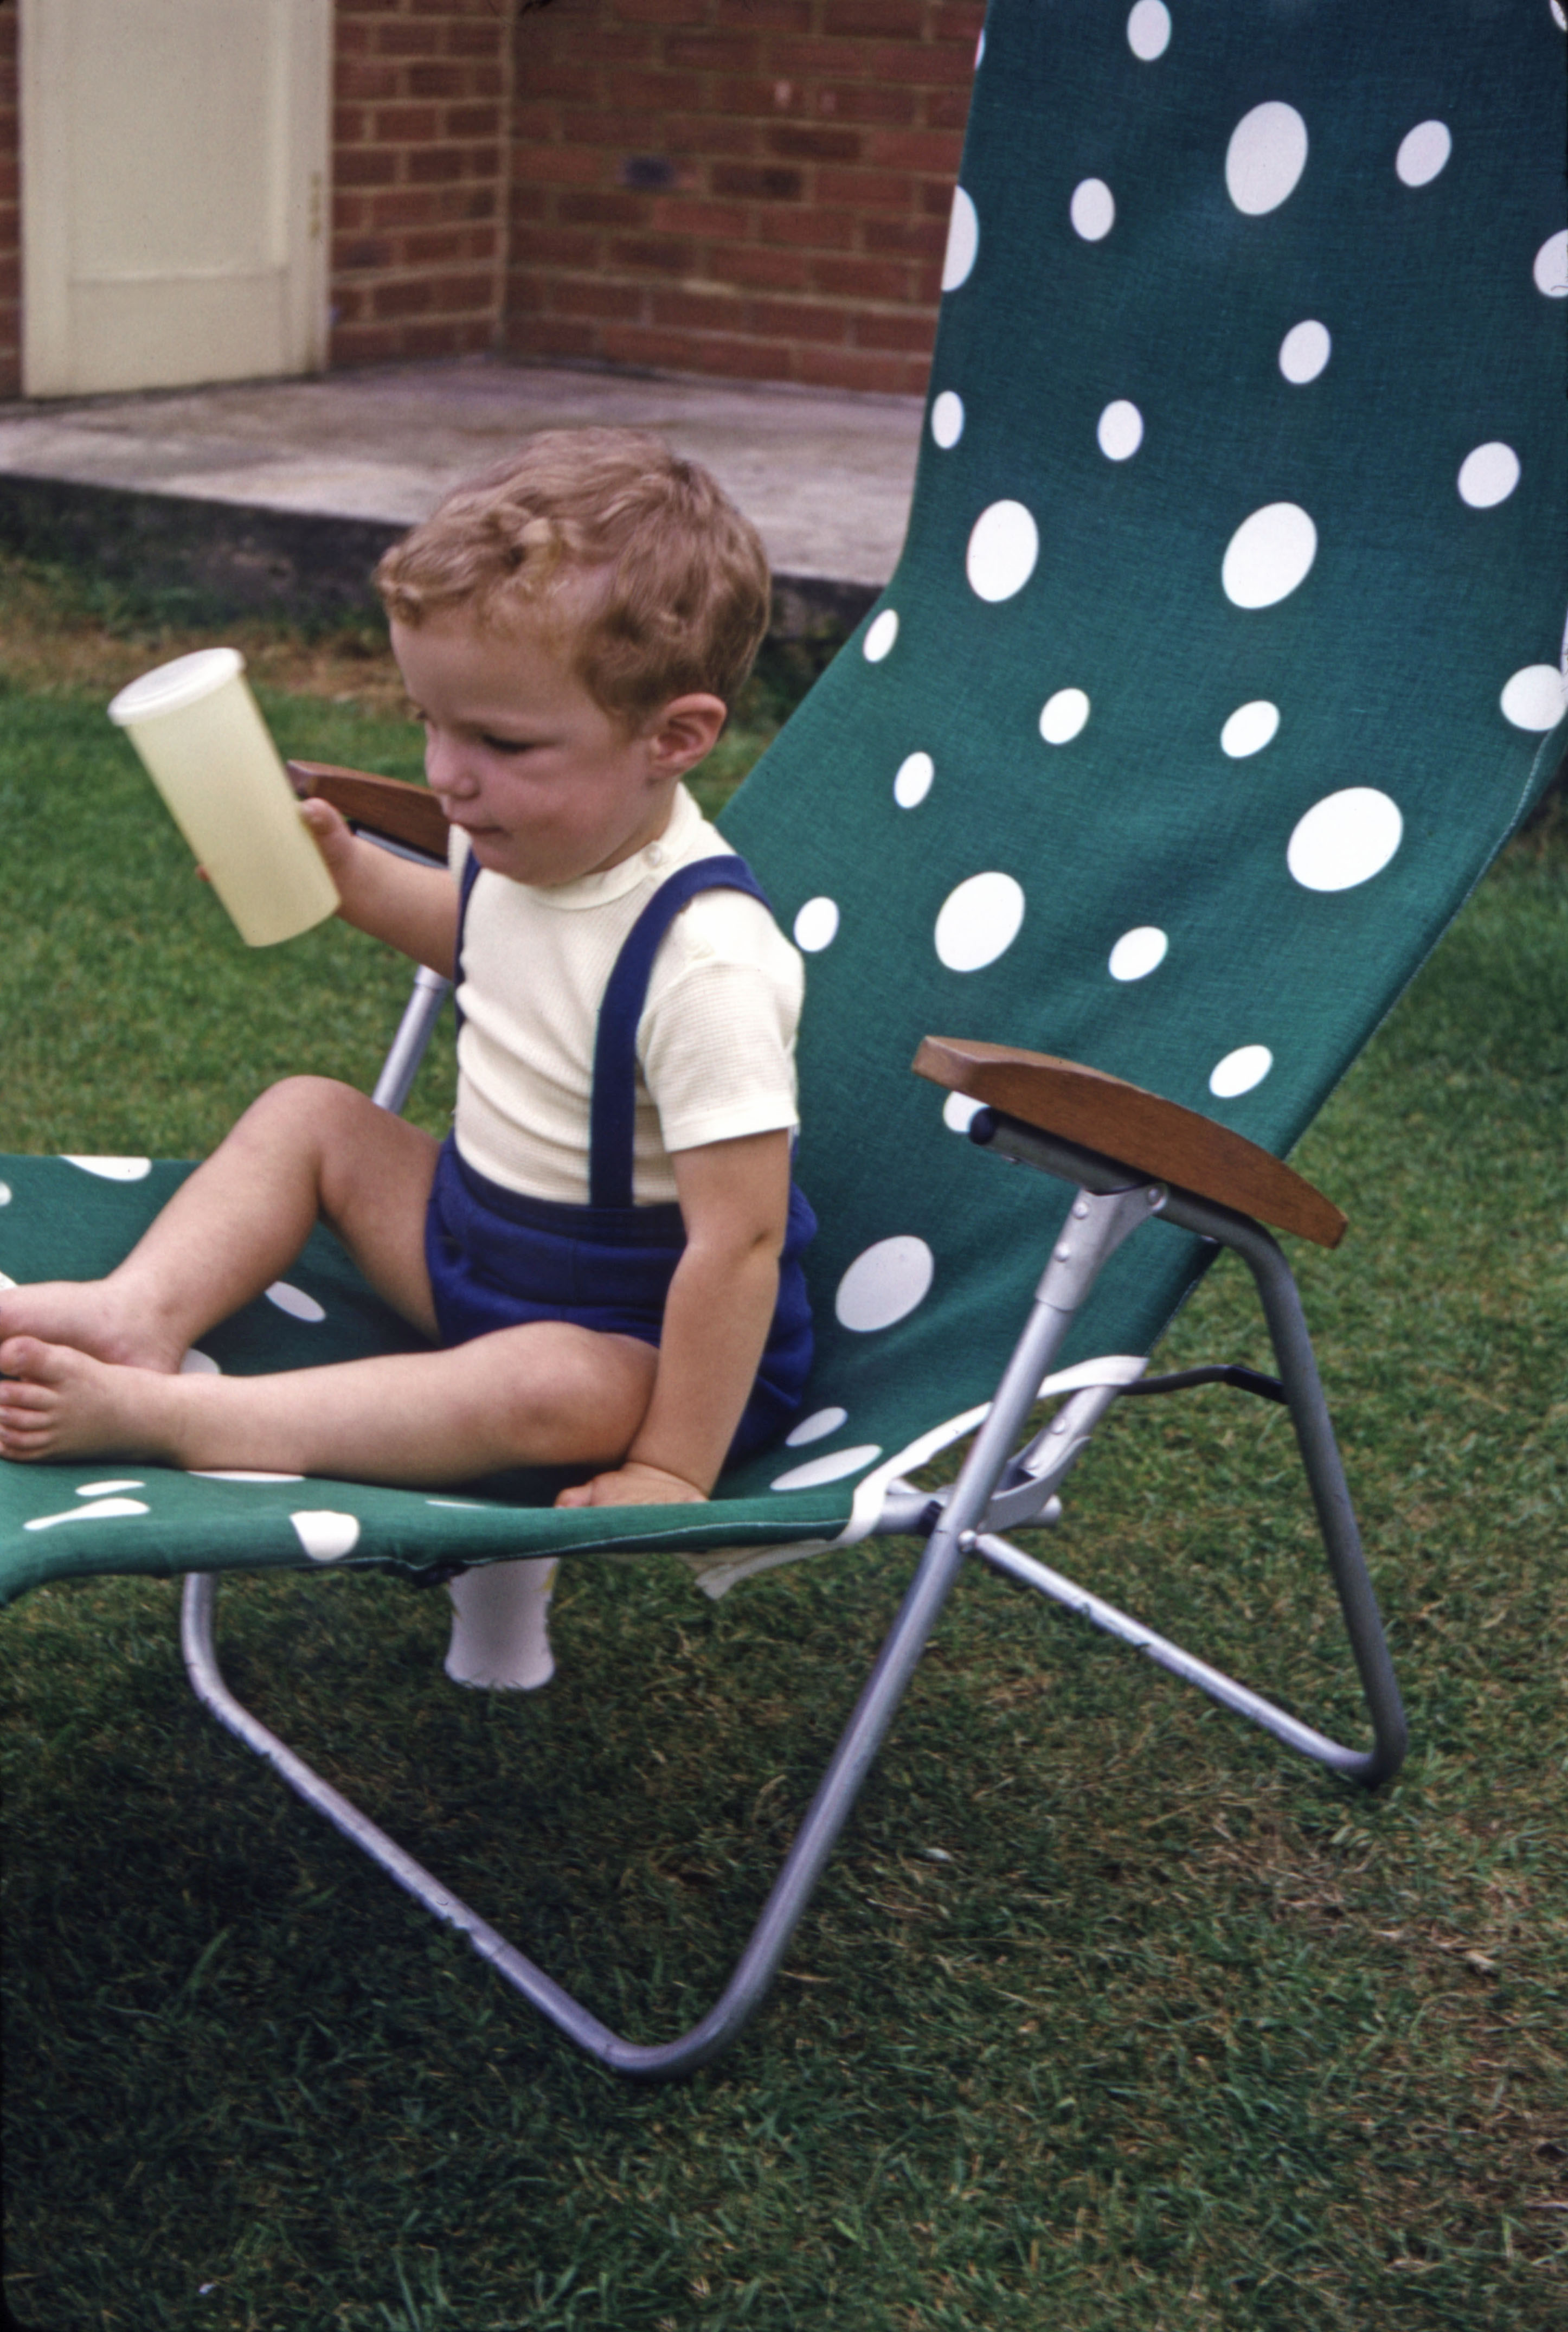 August 1965 Simon in the garden at Yateley.